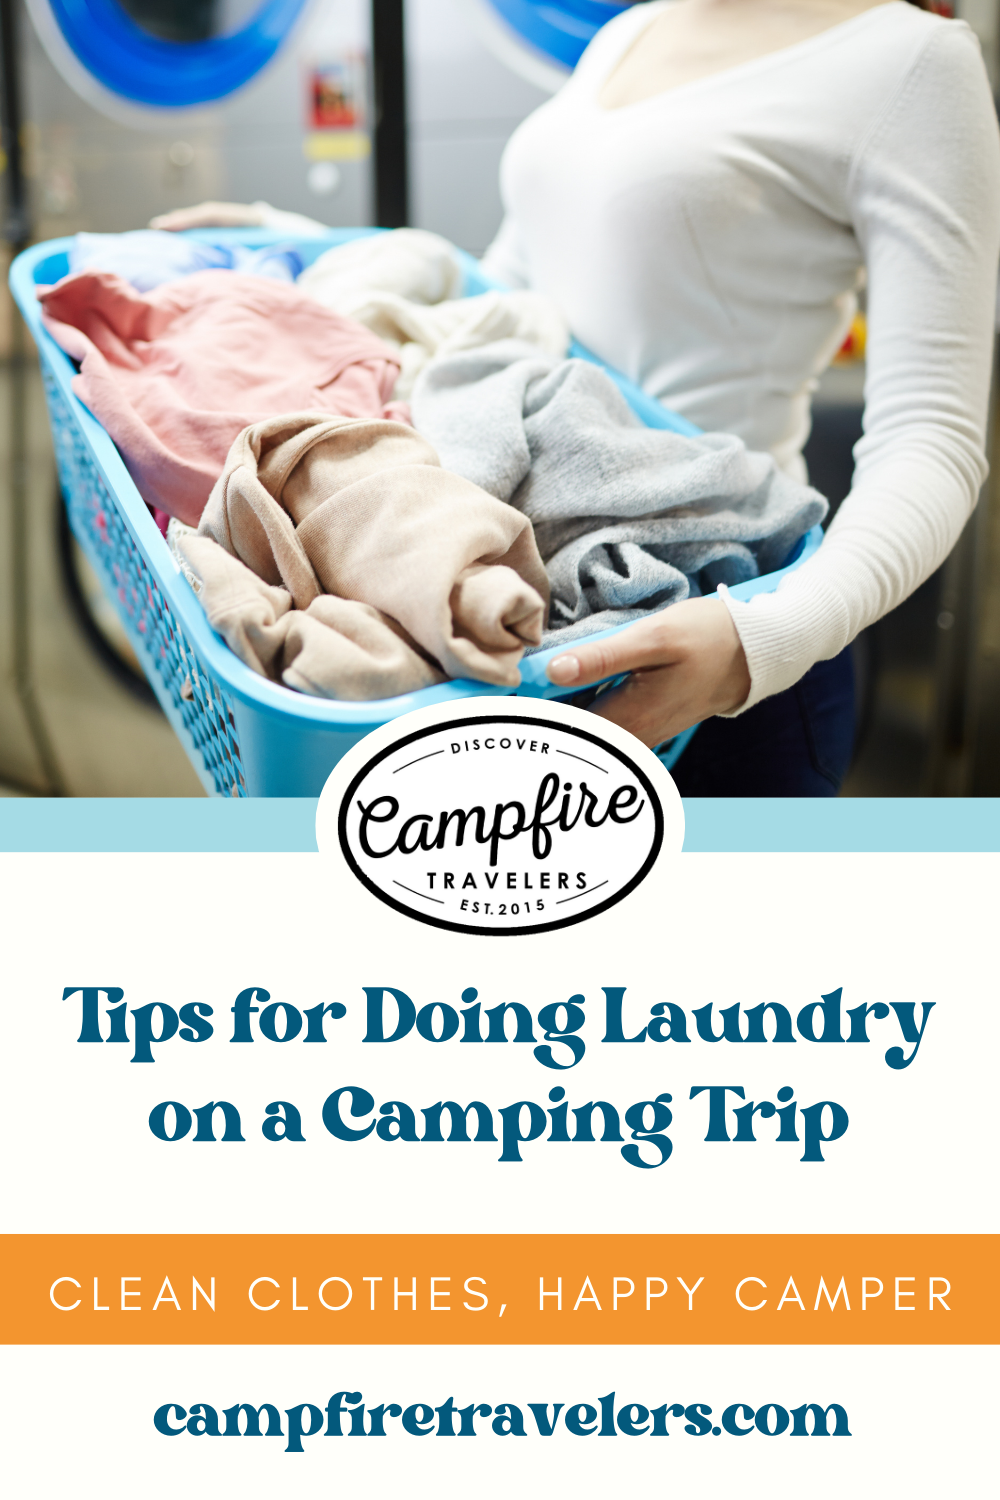 How to Wash Clothes - Laundry Tips and Tricks